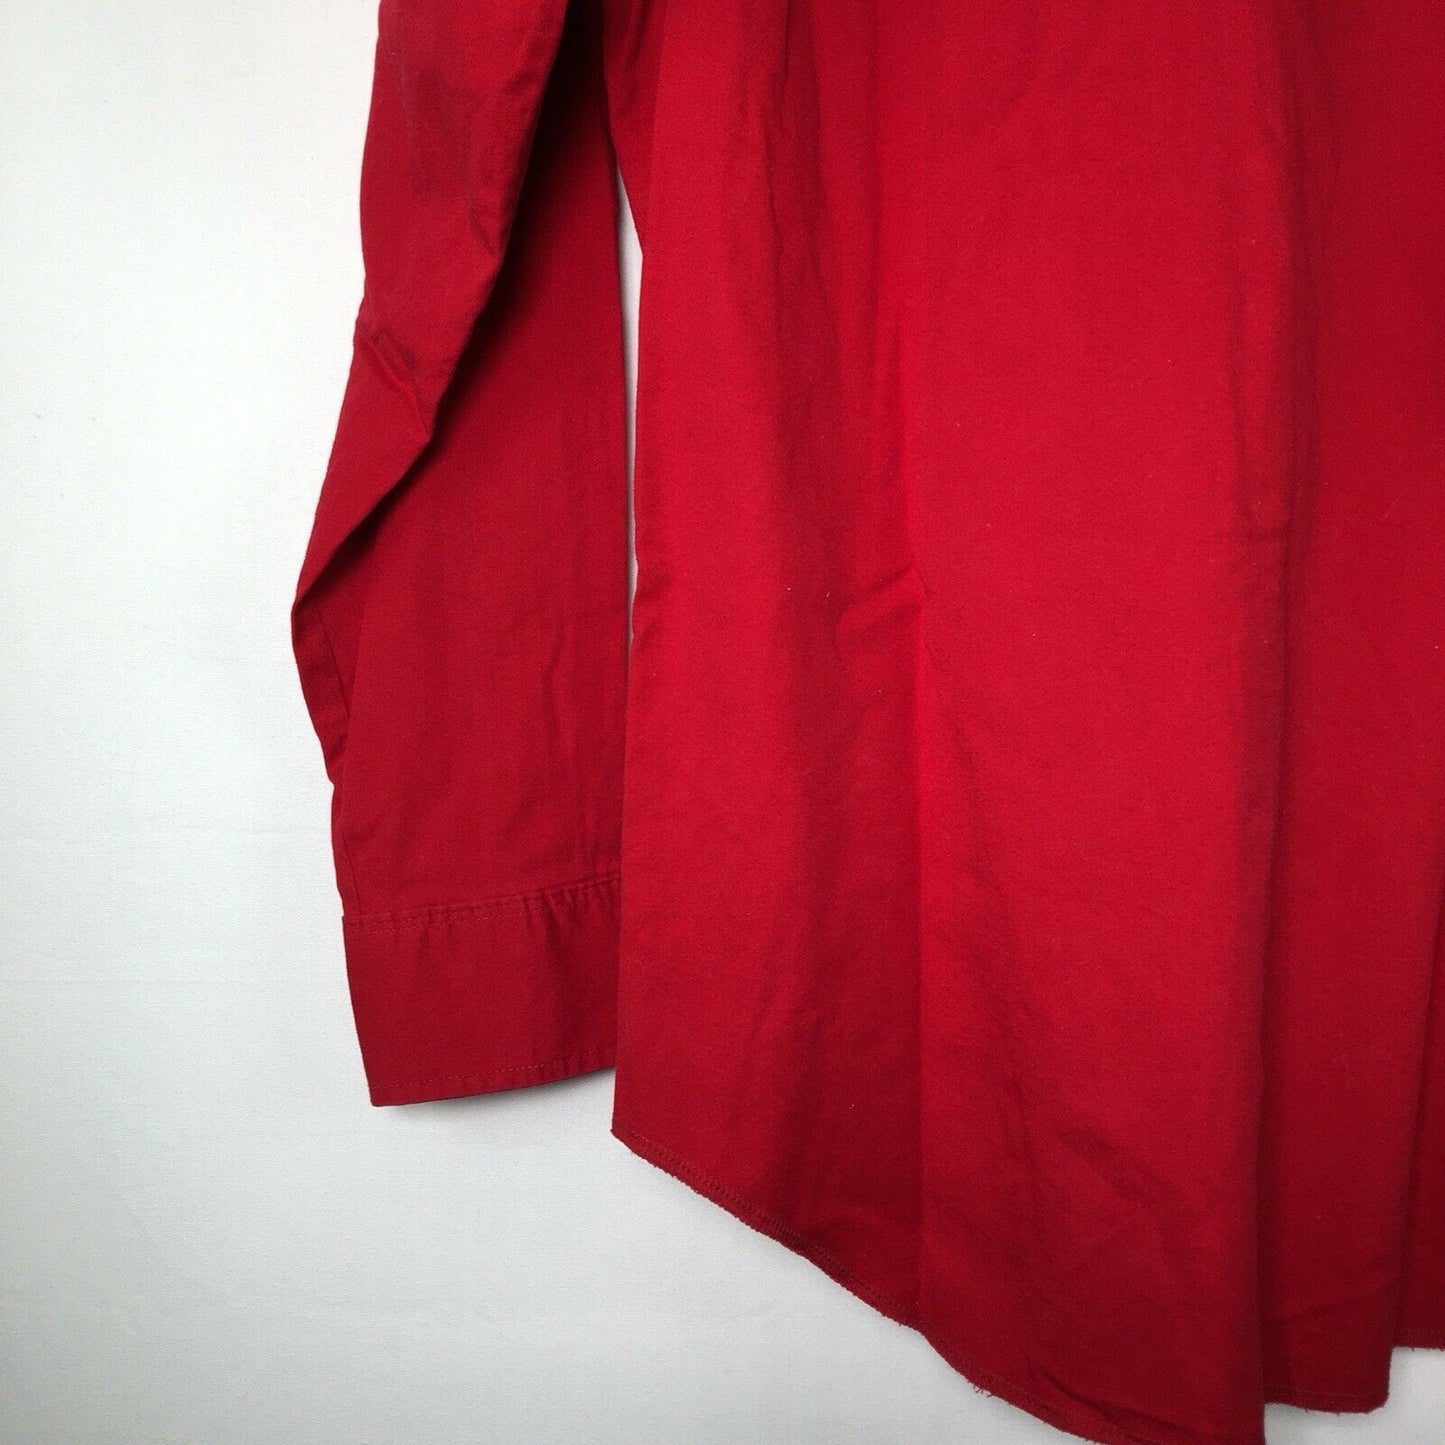 Wrangler Mens Size S Red X-Long Tails Single Needle Button Down Shirt